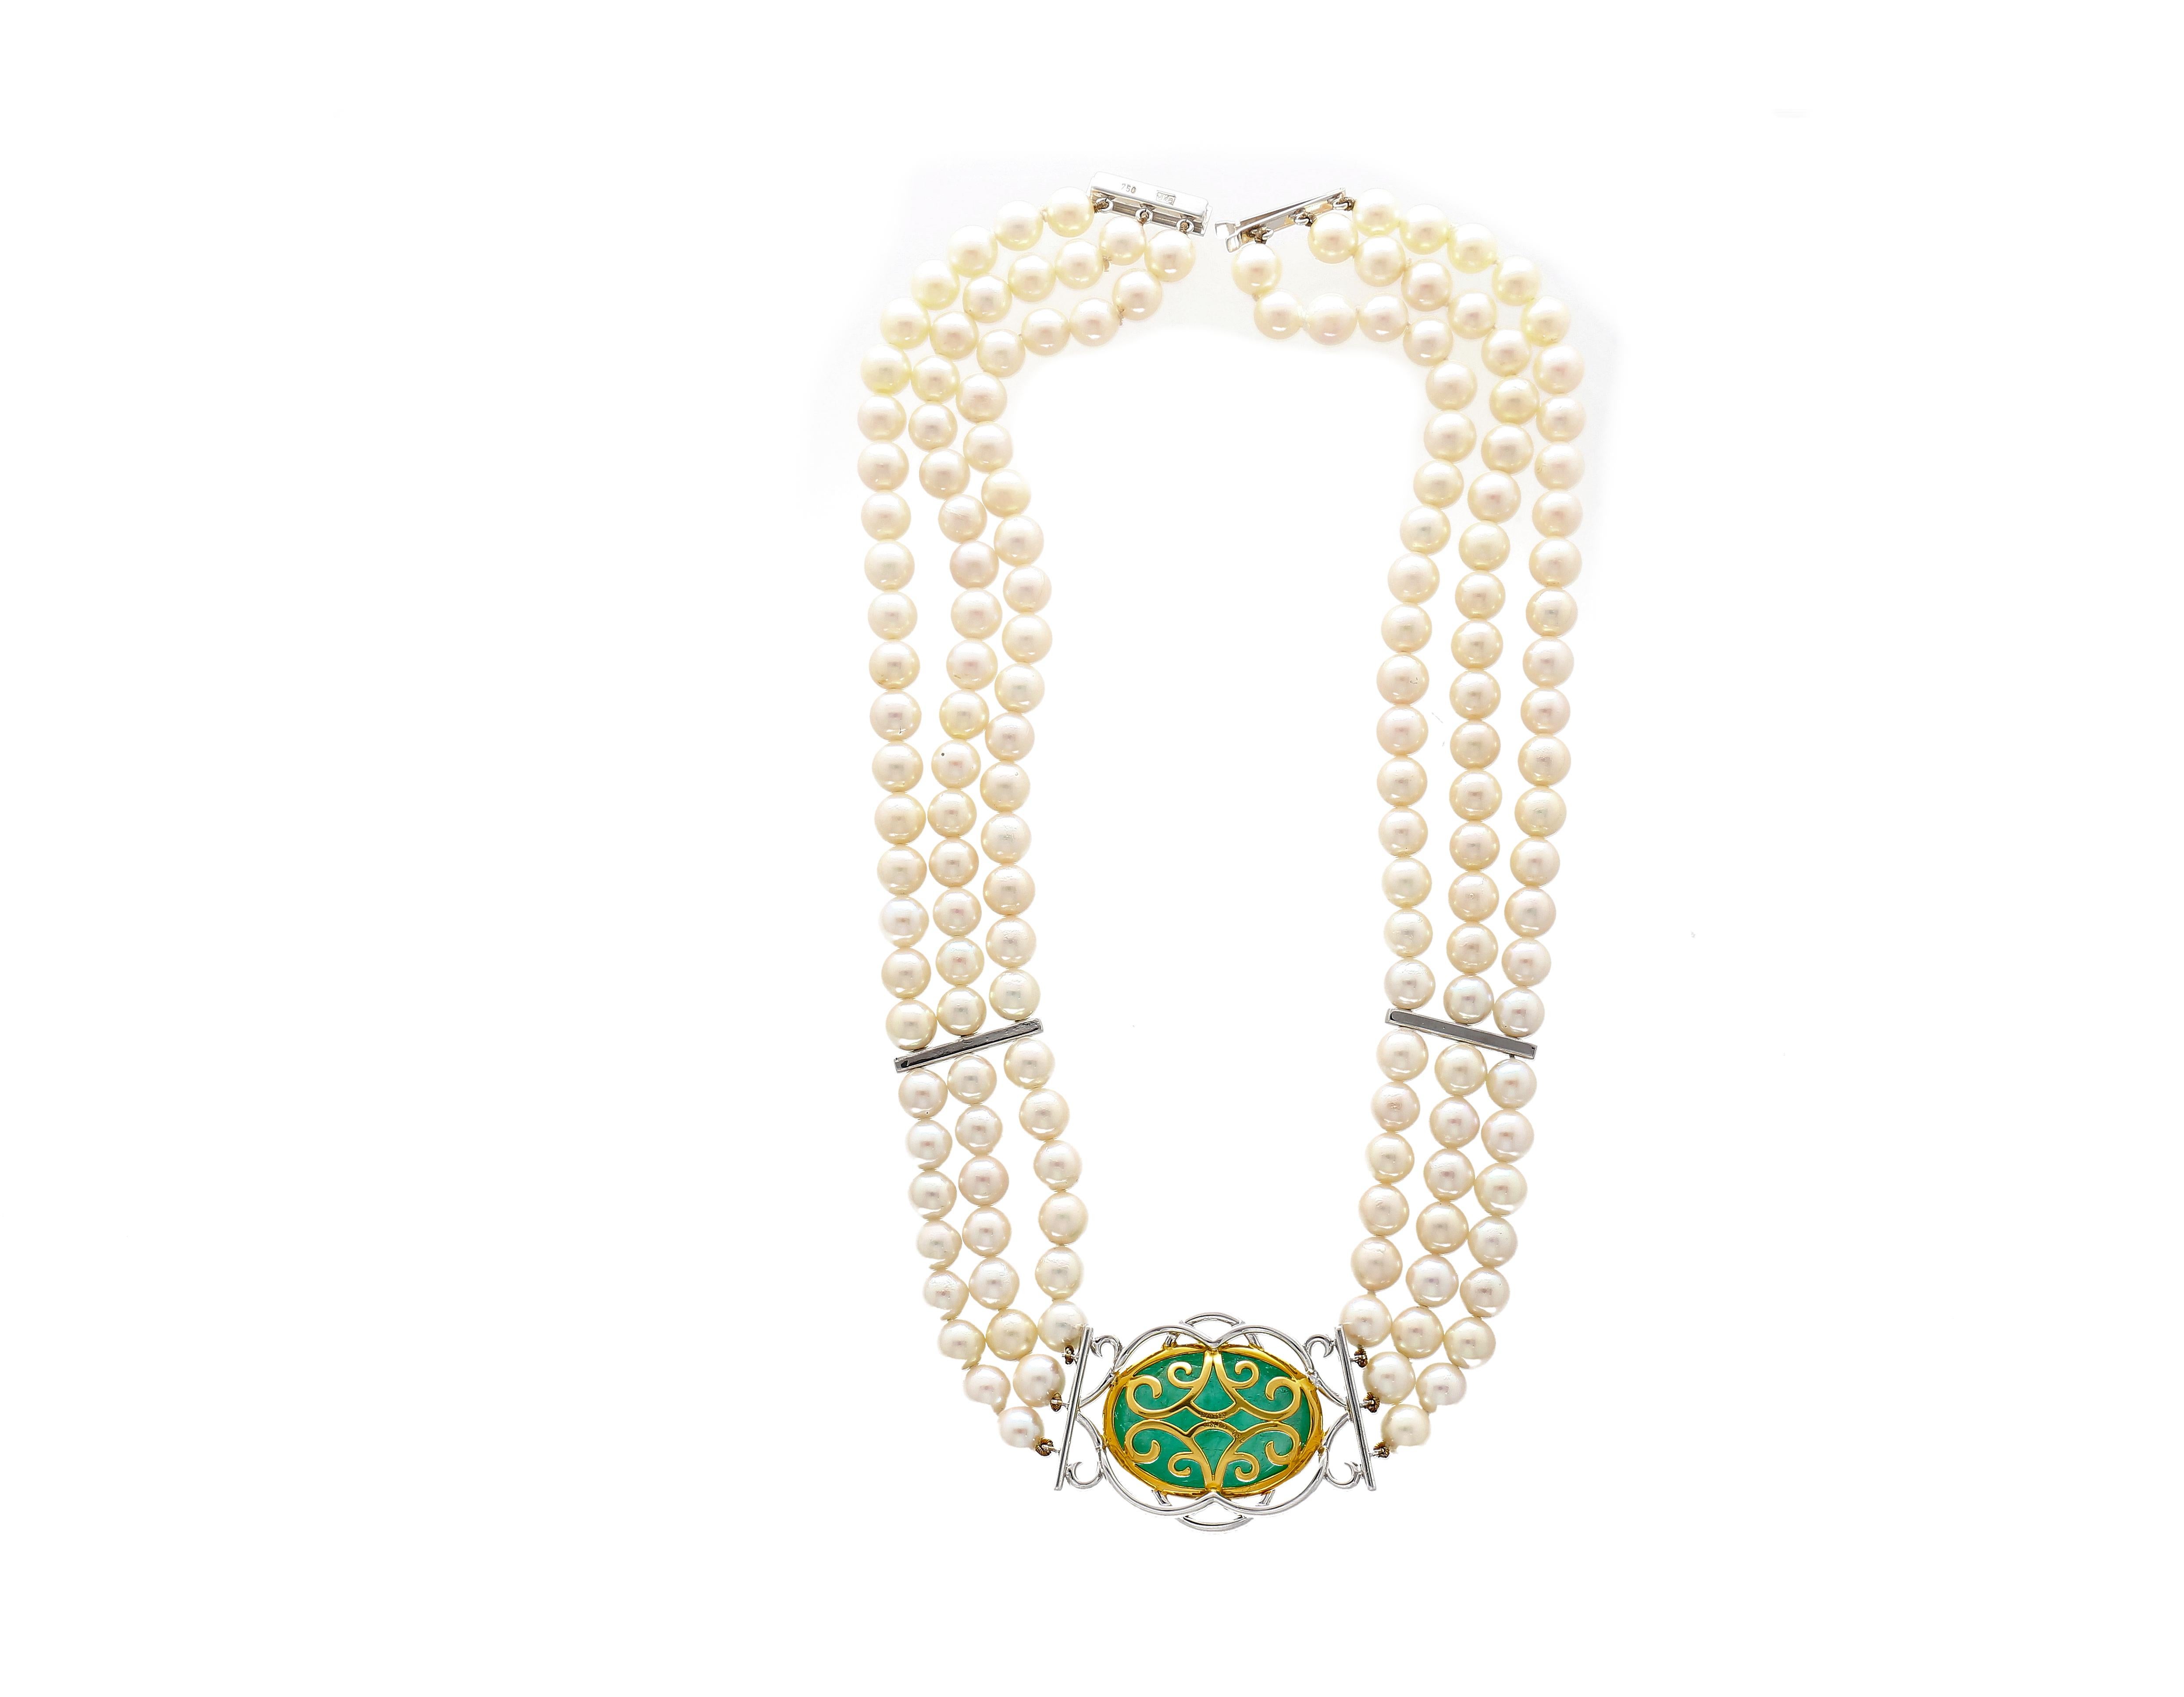 This necklace features a cabochon cut green emerald bezel set pendant. Paired with 150 round cut diamond side stones, this beautiful necklace is strung together with 3 strands of pearls. This vintage choker necklace sits beautifully on the neck as a